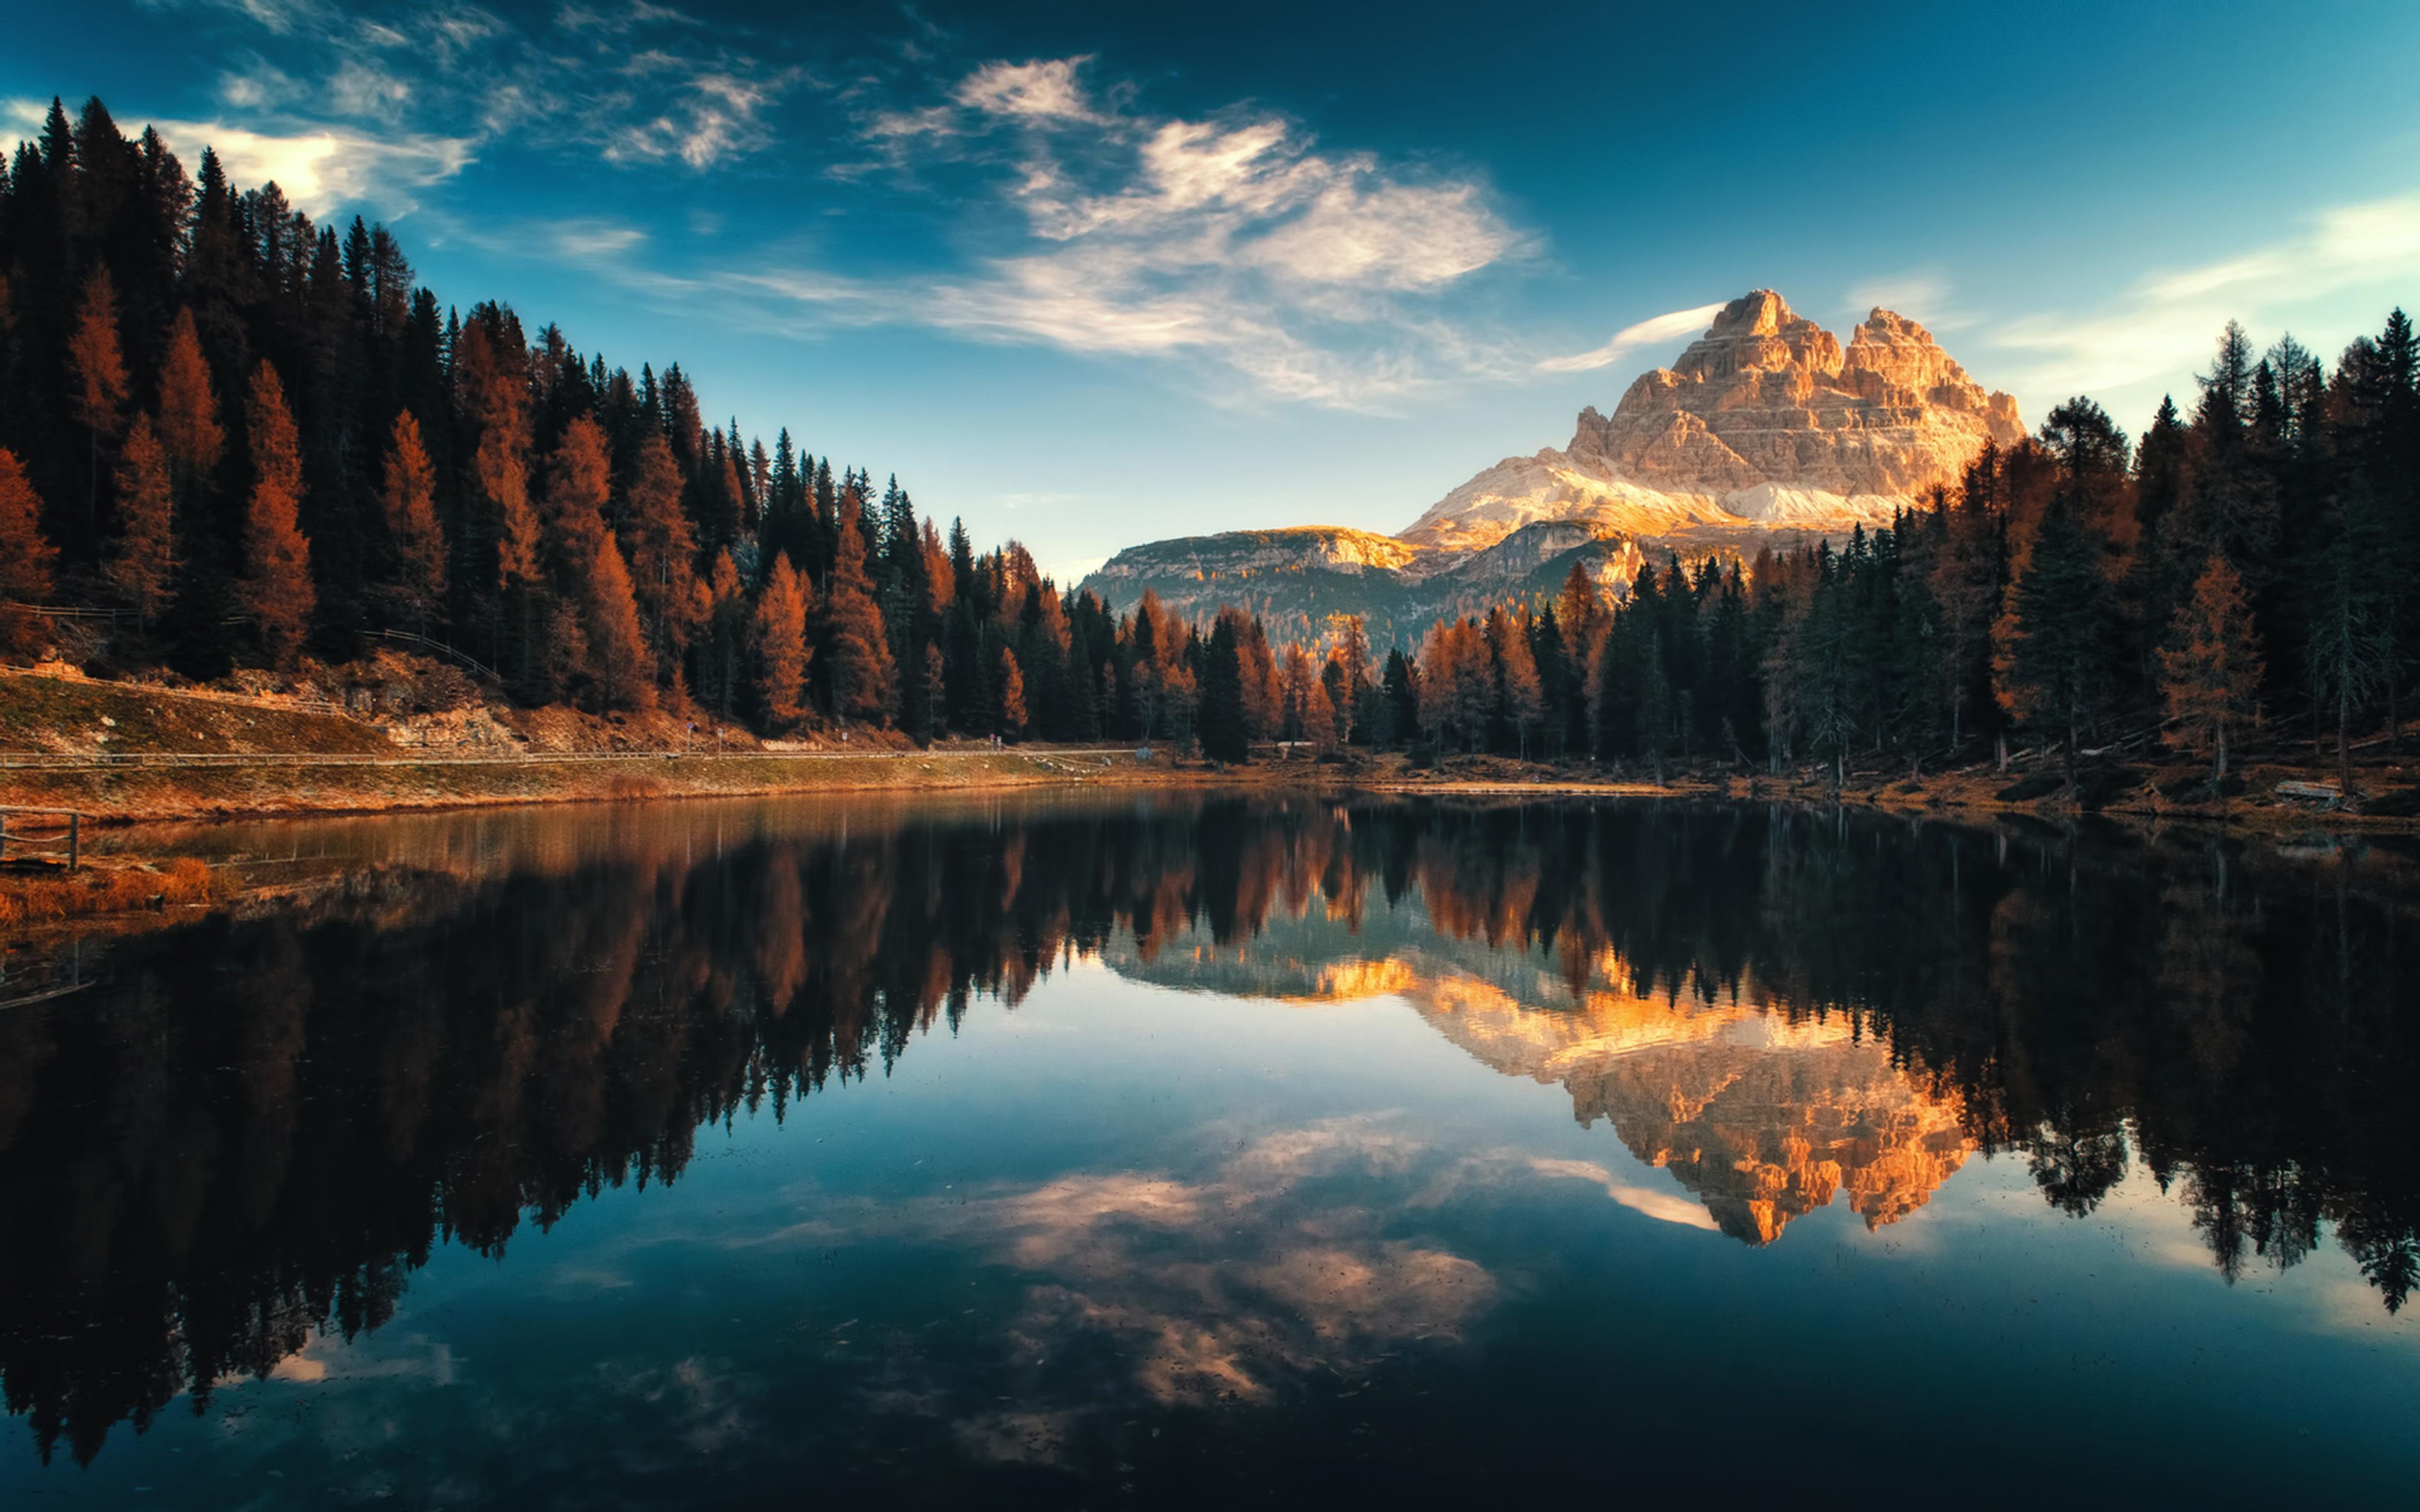 Dolomiti Italy Autumn Lago Antorno Landscape Photography Desktop HD Wallpaper For Pc Tablet And Mobile 3840x2400, Wallpaper13.com